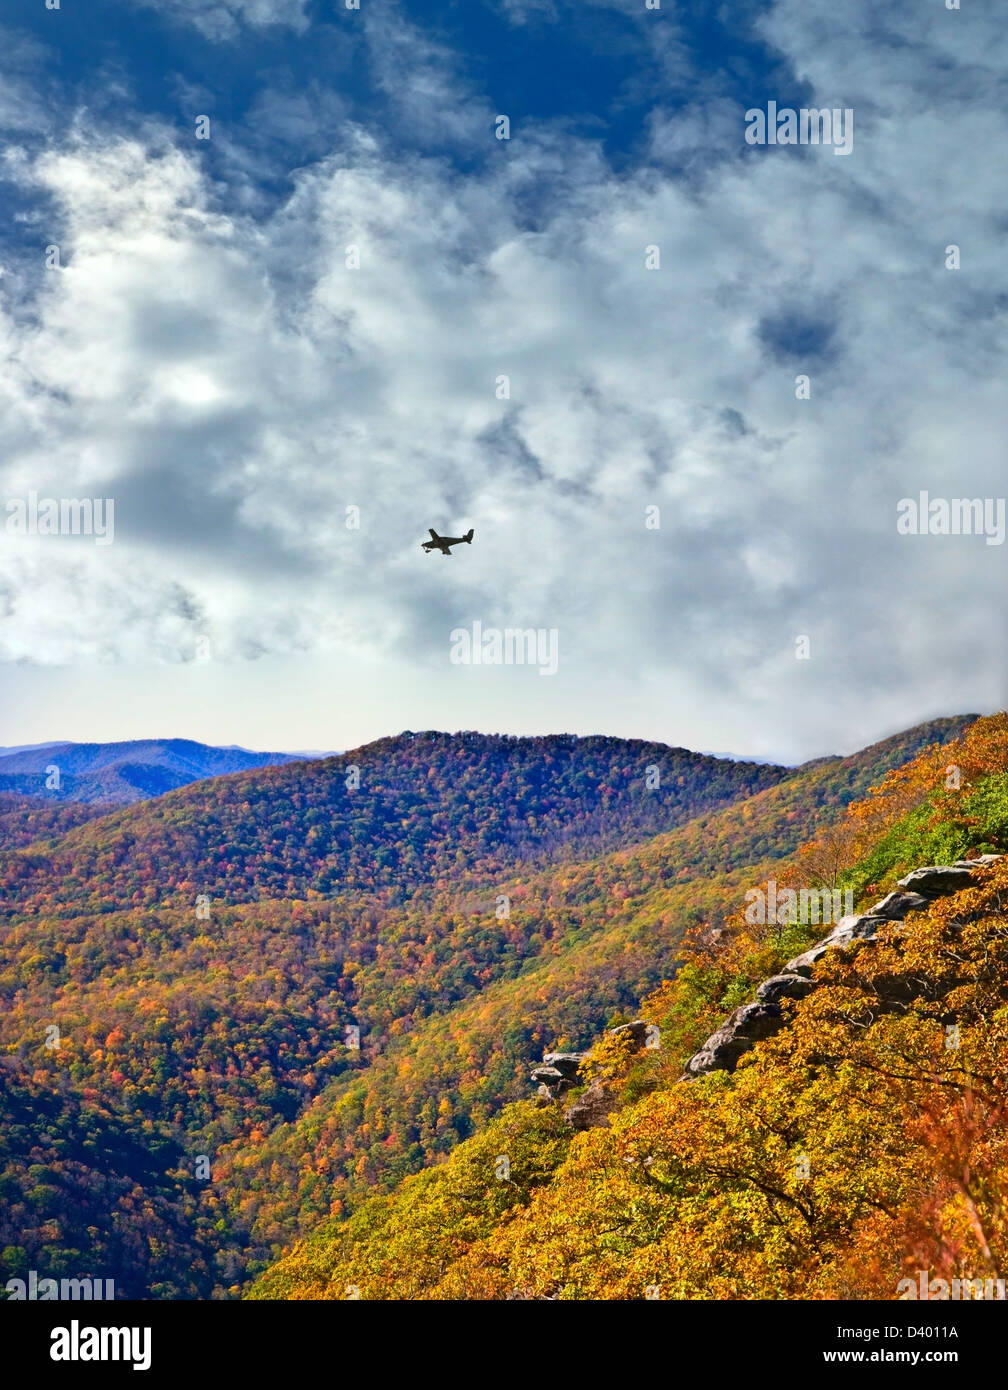 Long distance view of mountains in the fall with a small airplane flying over. Stock Photo